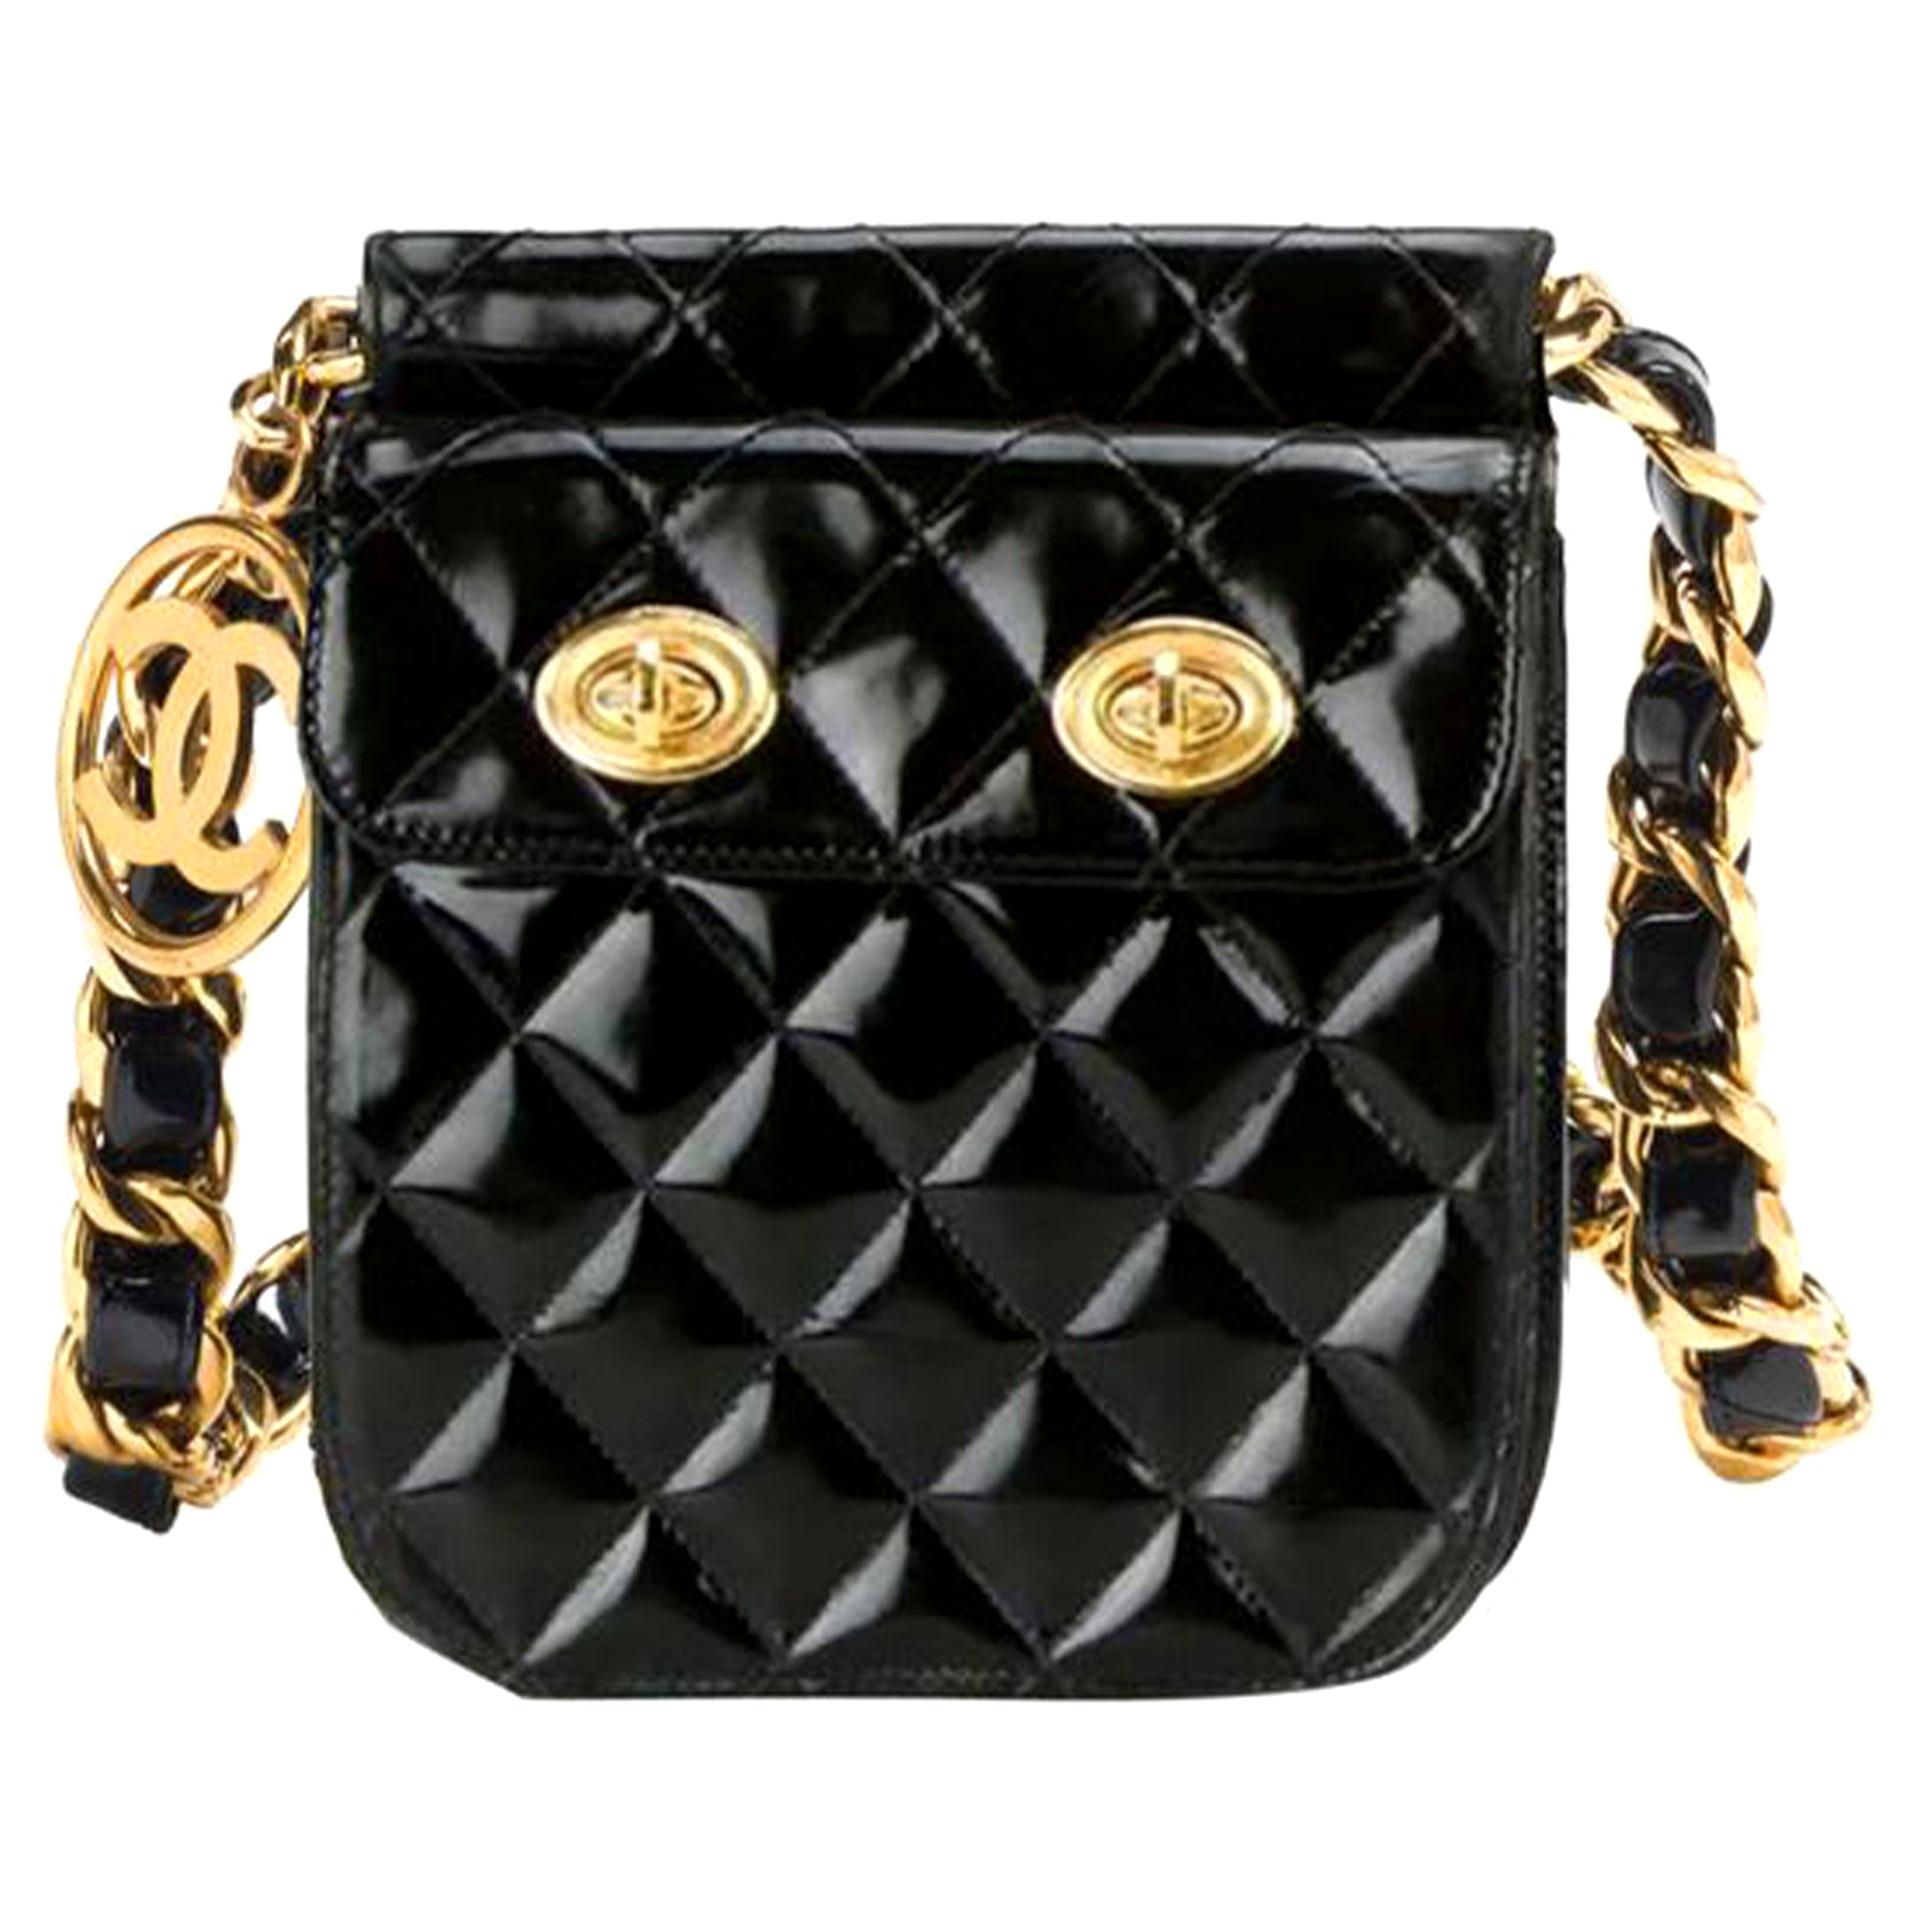 How to Shop for Vintage Luxury Handbags  My Chanel Purse